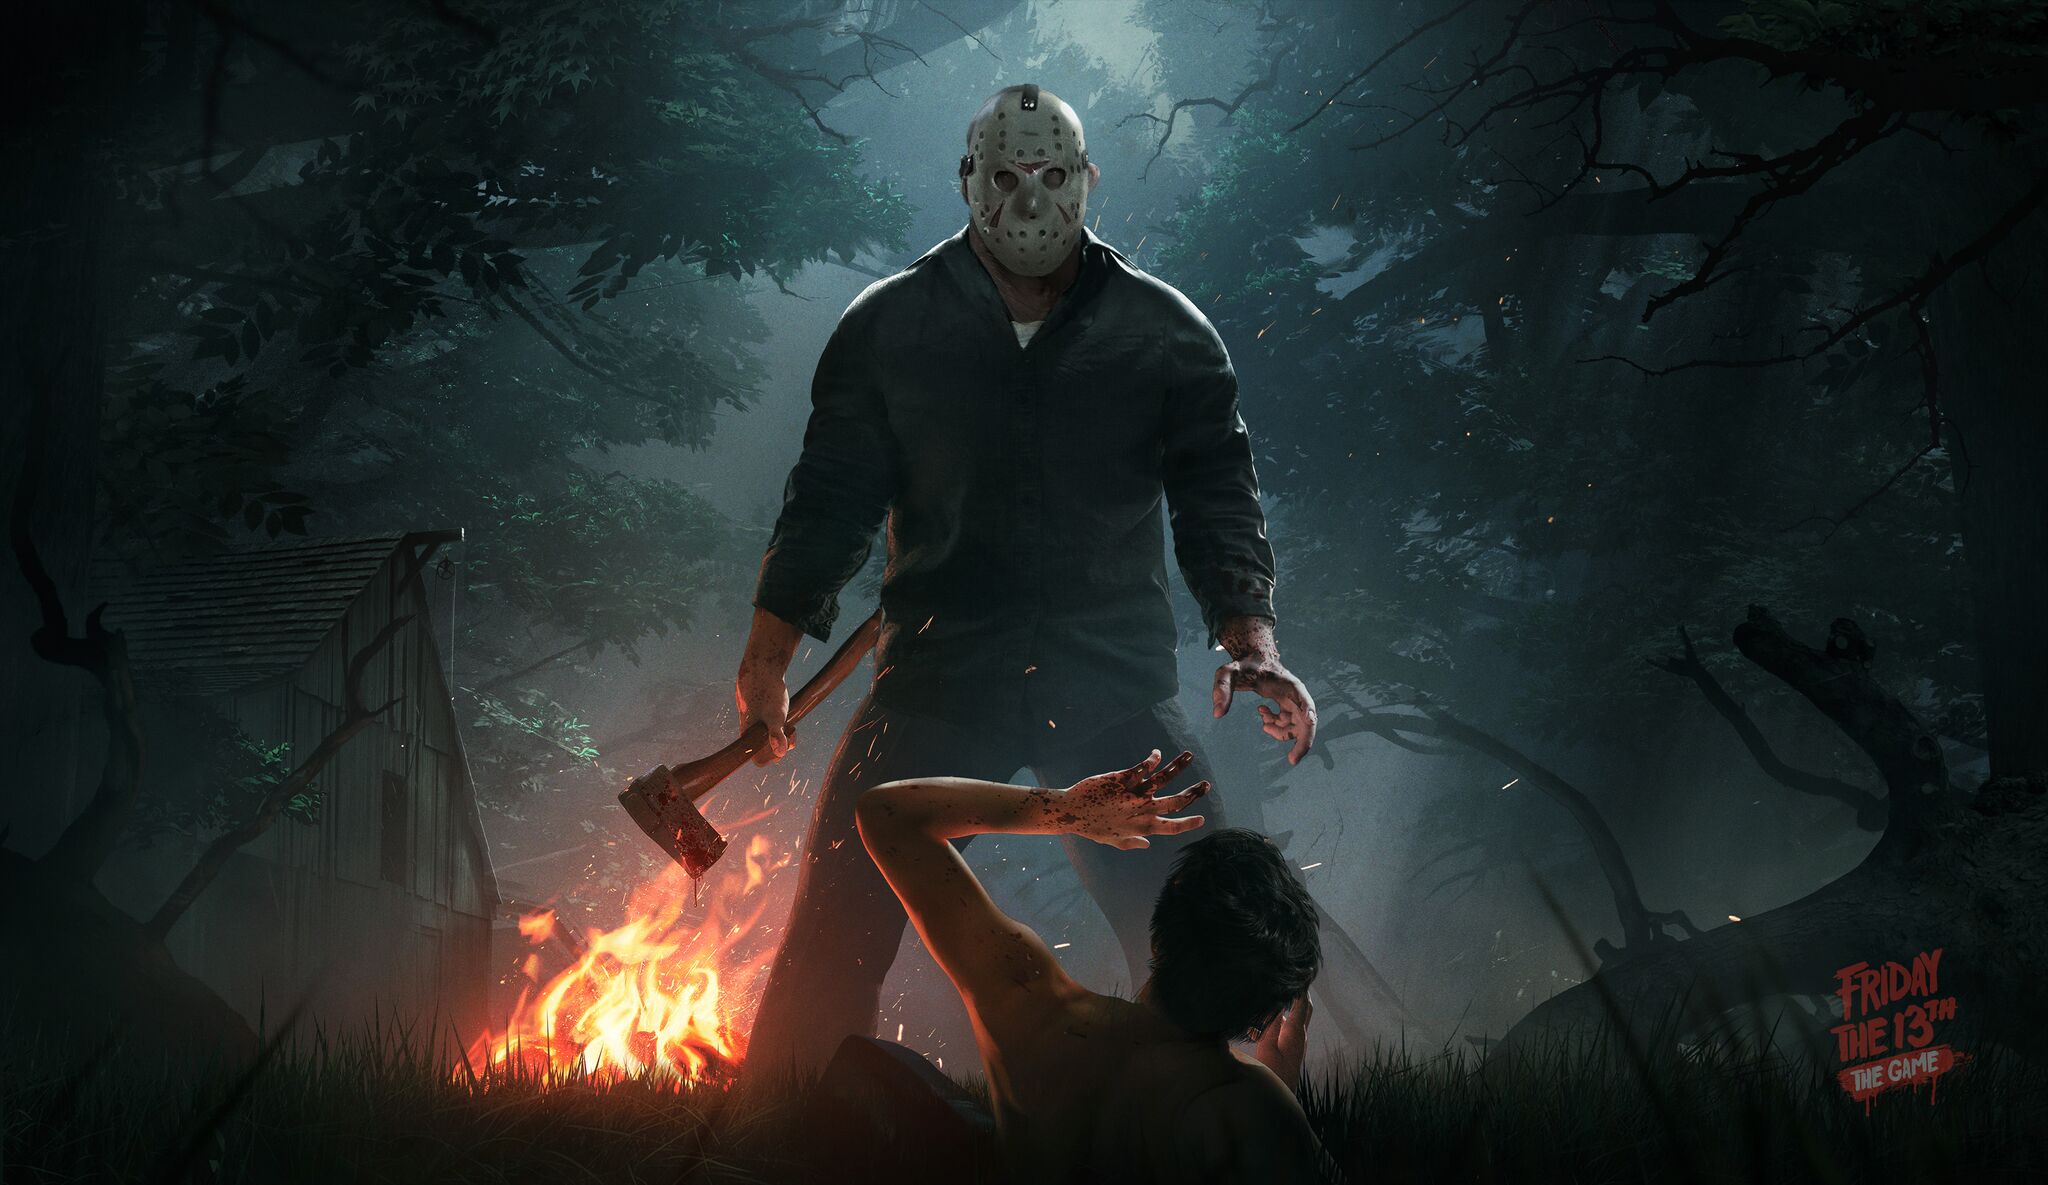 Friday The 13th: The Game Releases This Week